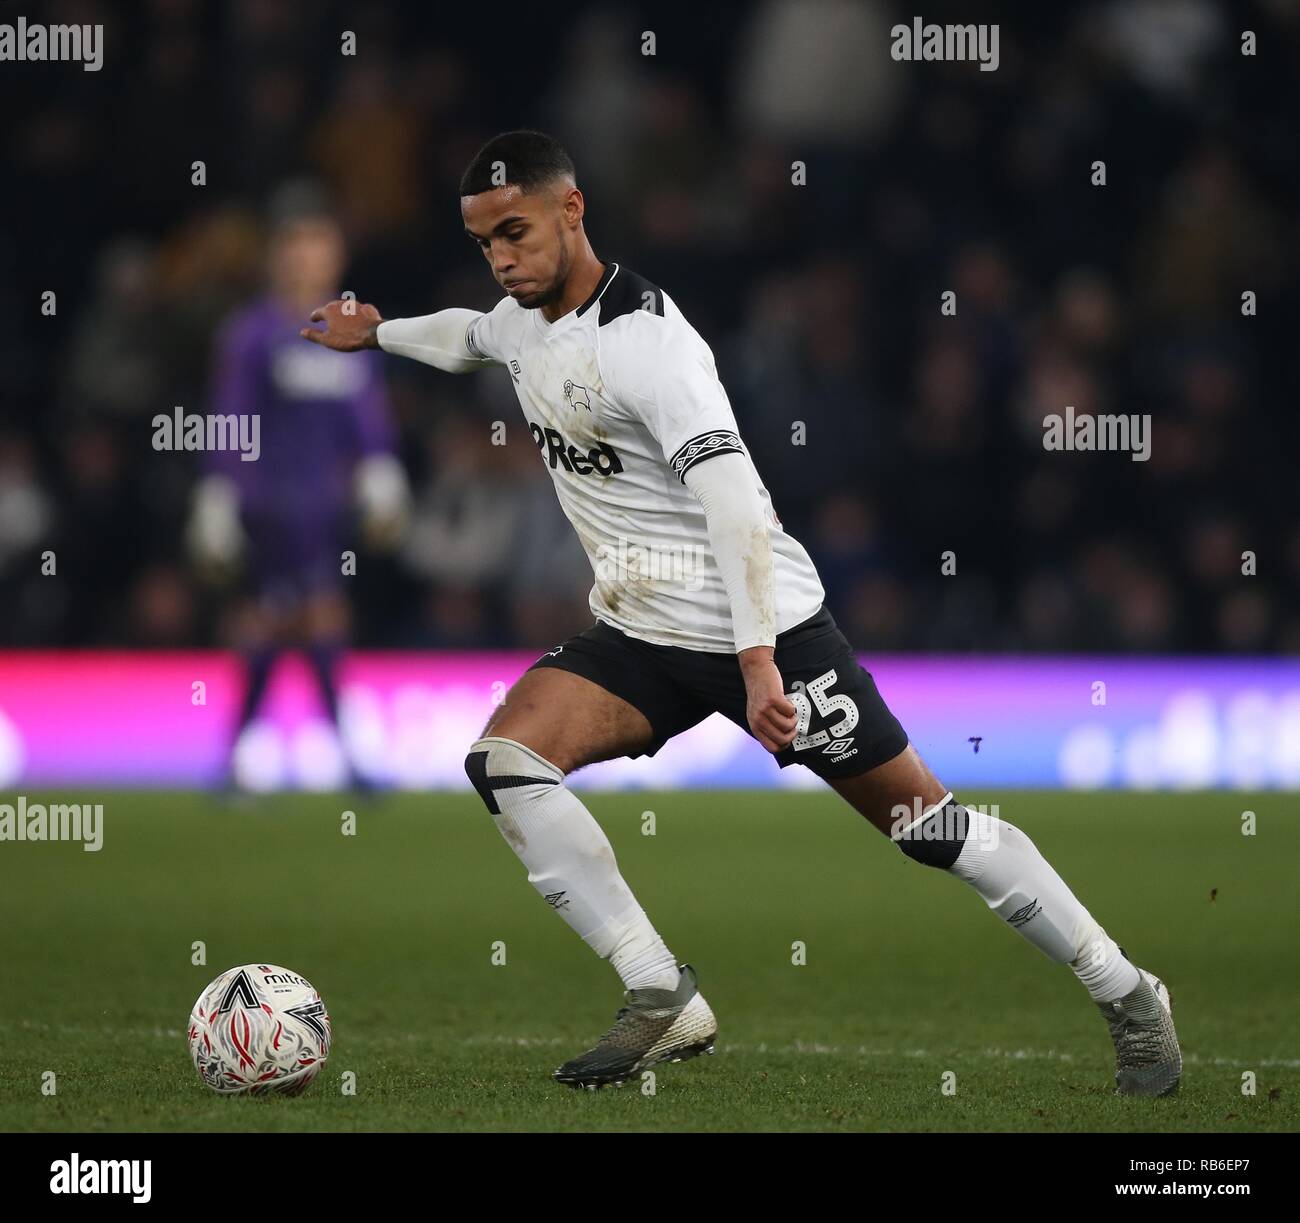 MAX LOWE, Derby County FC, DERBY COUNTY V SOUTHAMPTON, die Emirate FA Cup 3. Runde, 2019 Stockfoto